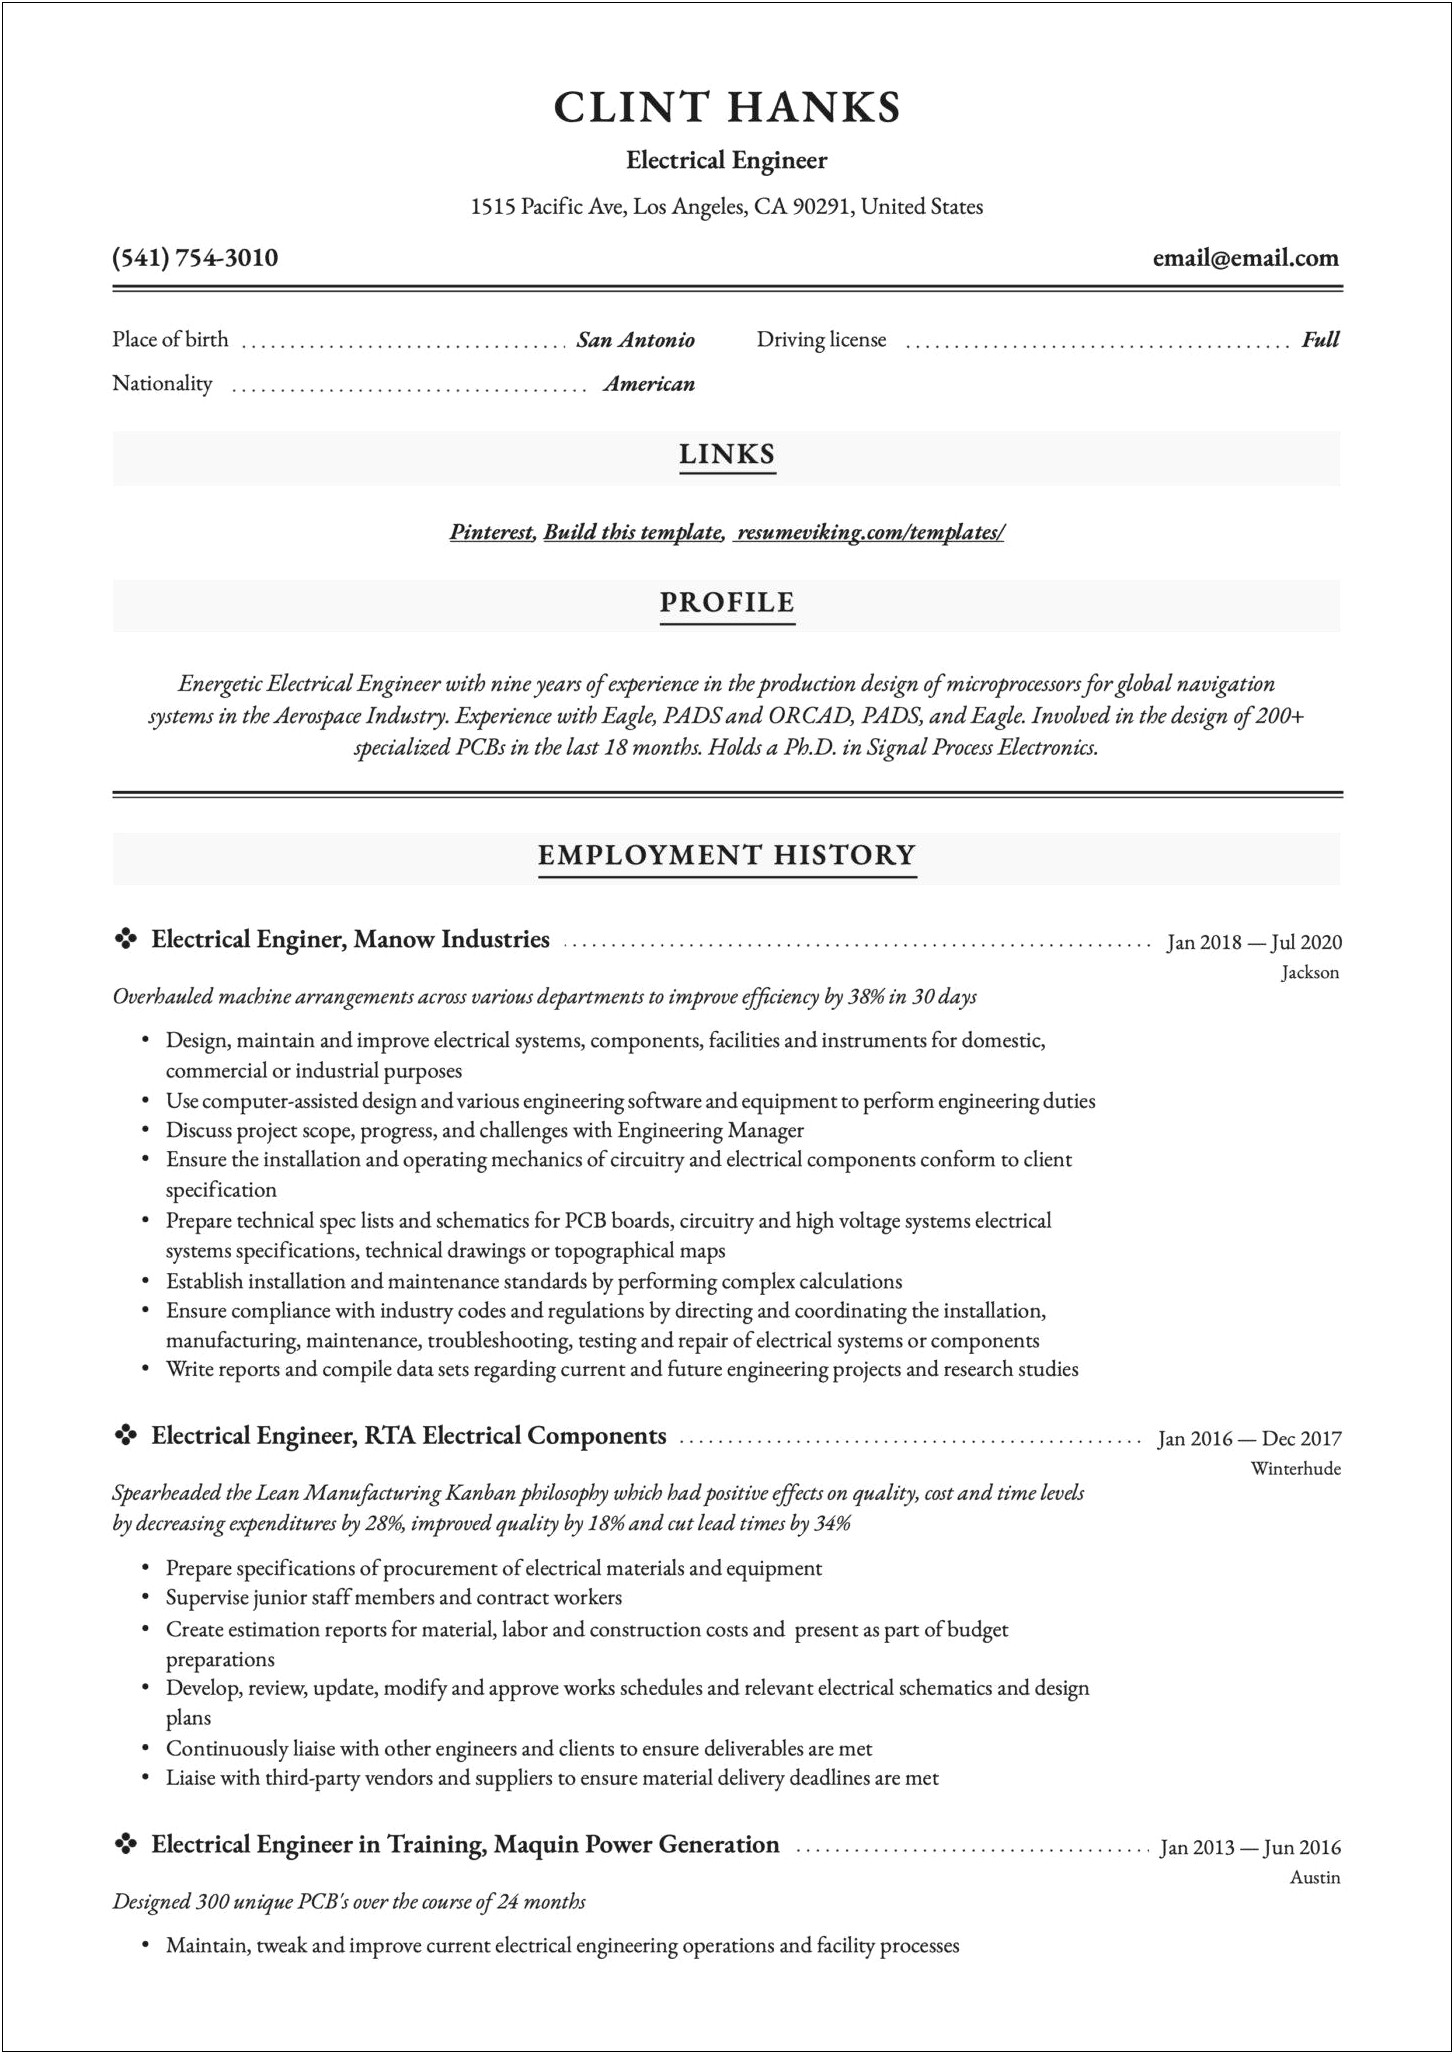 Resume Objective Examples Electrical Engineering